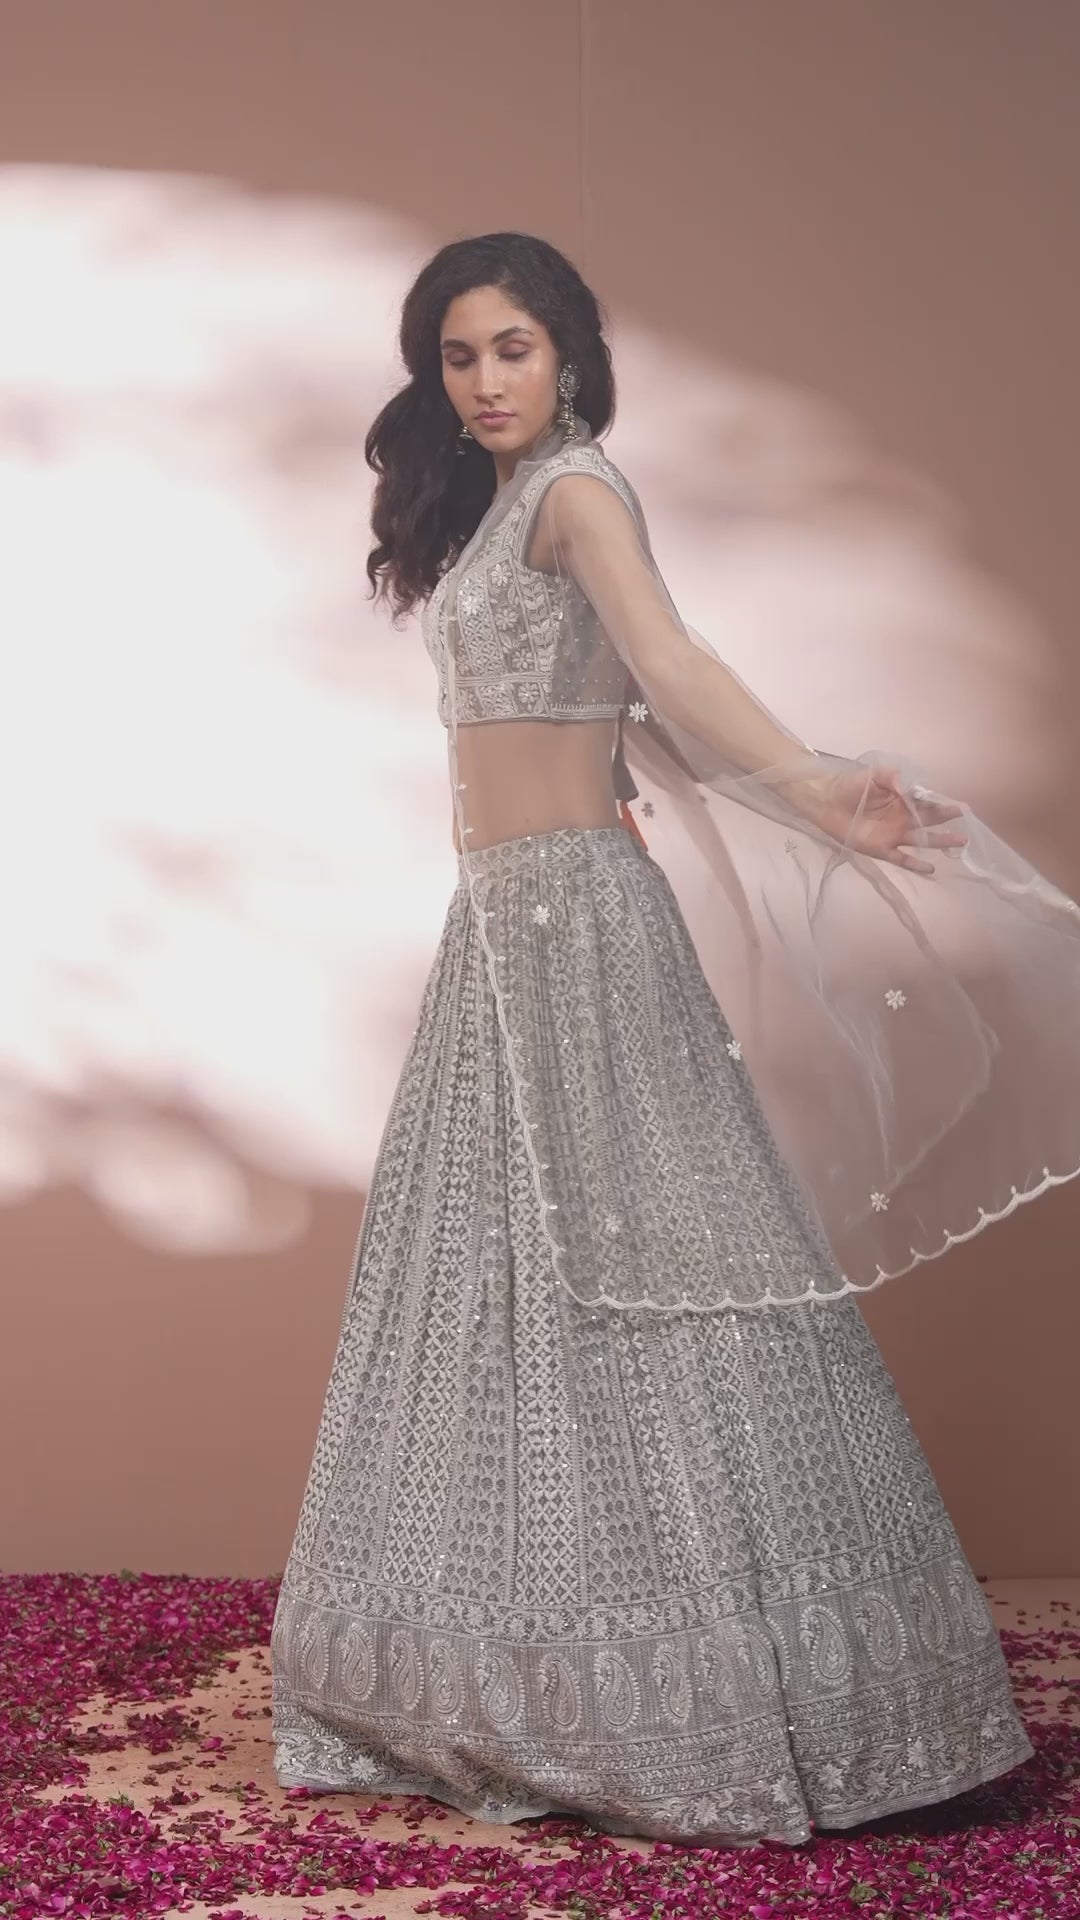 The Latest Metallic Lehenga Designs Are Here to Steal Hearts